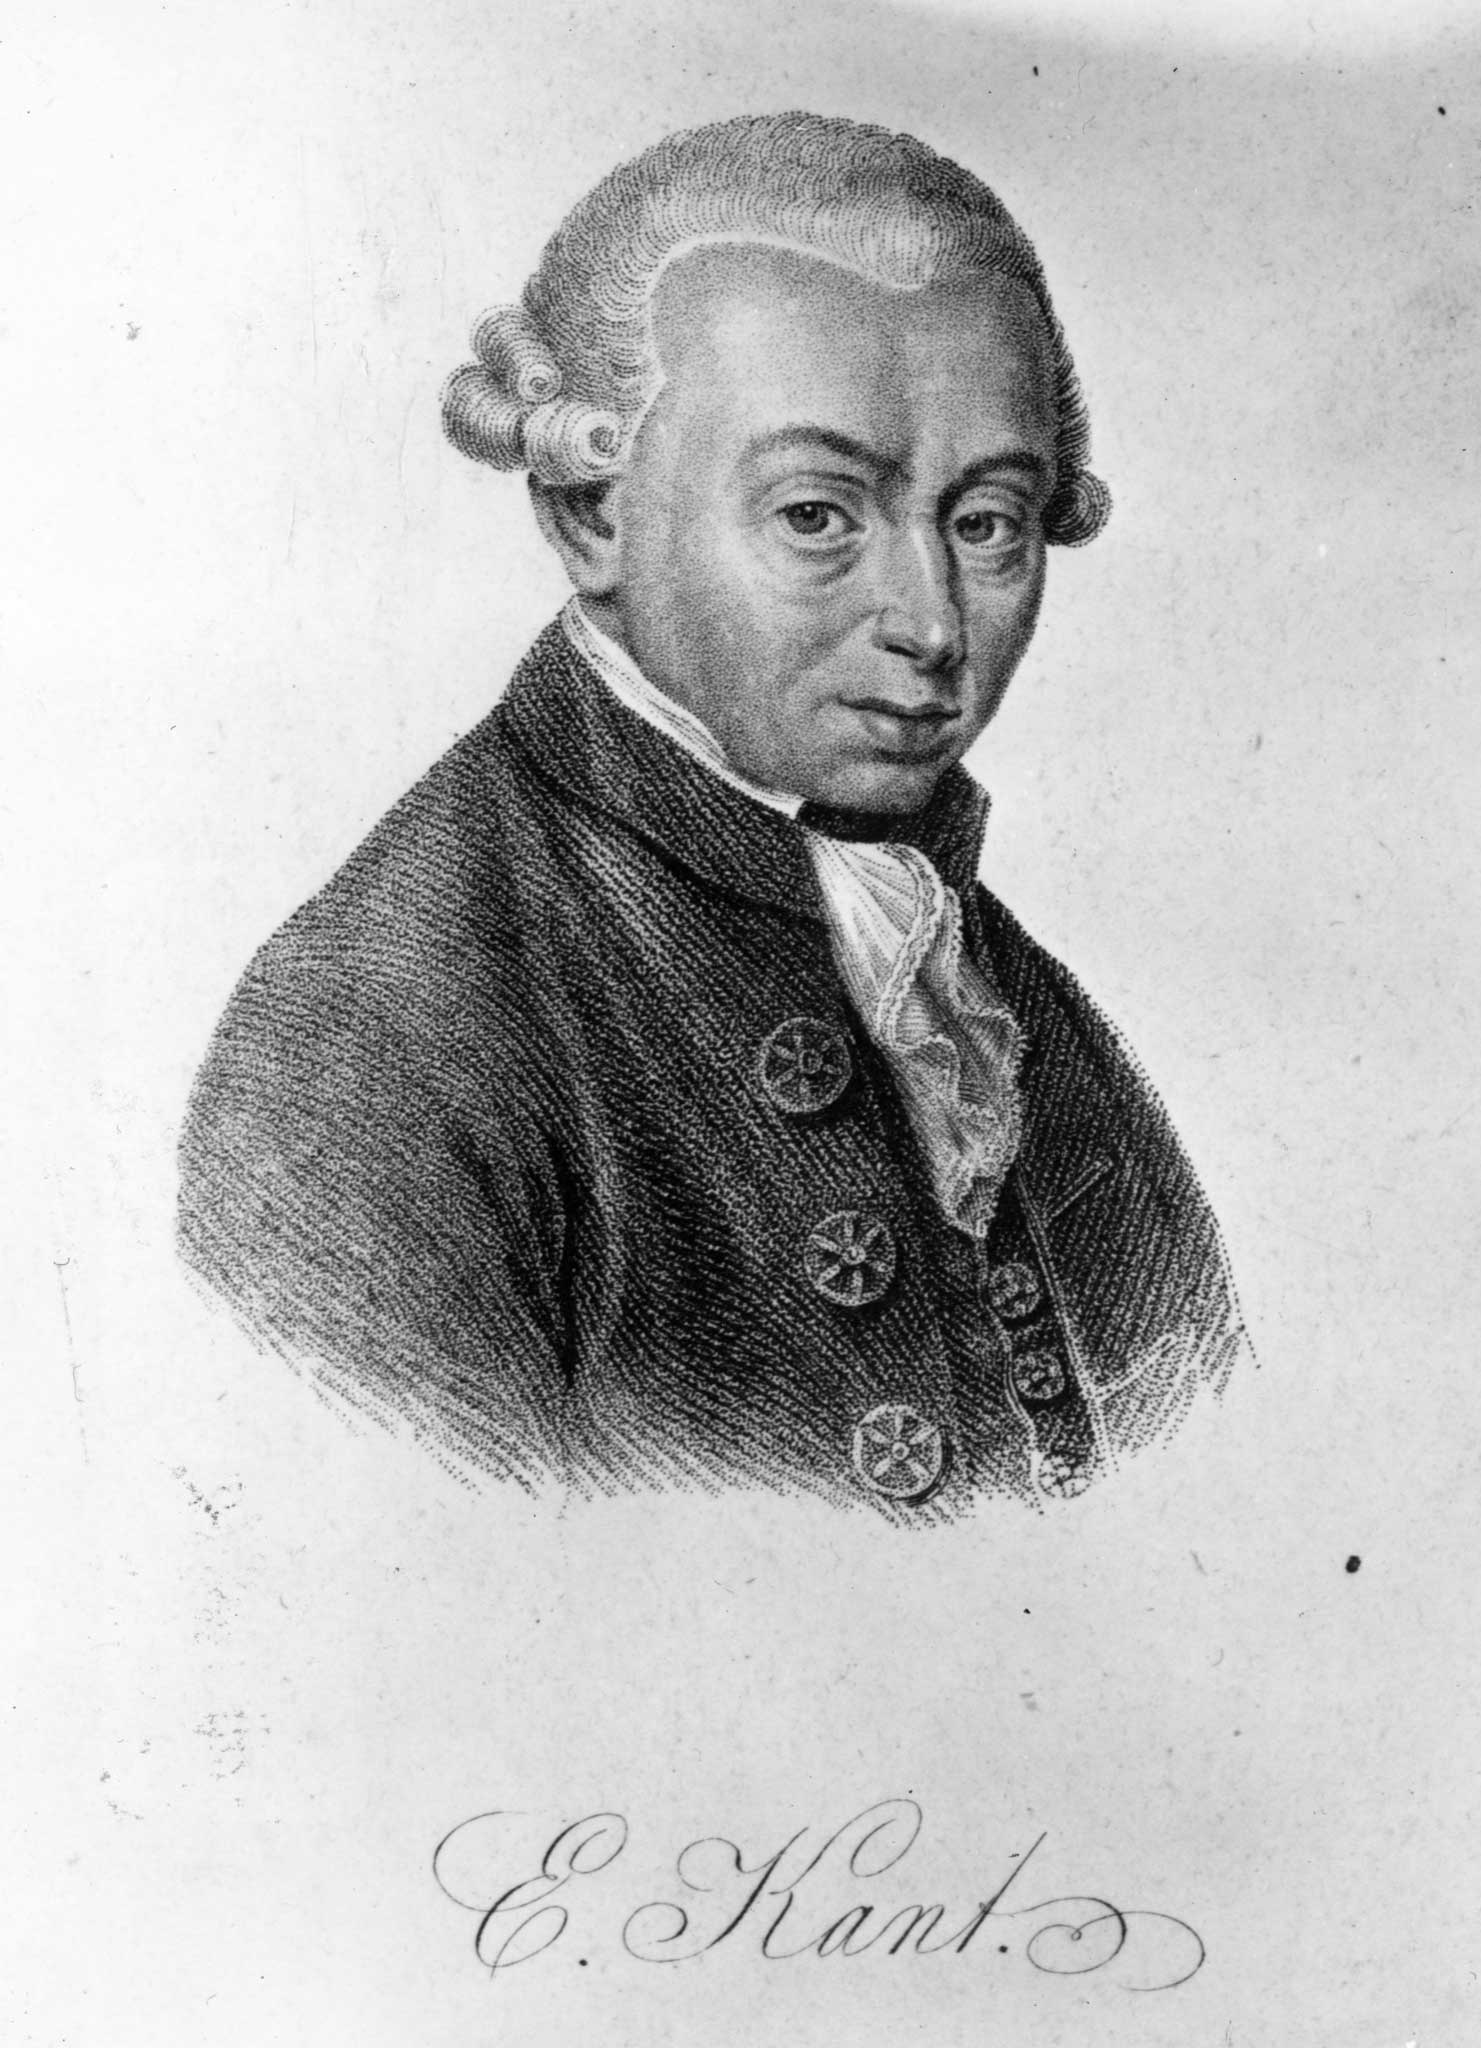 Kant's book requires a degree of concentration to be understood and appreciated